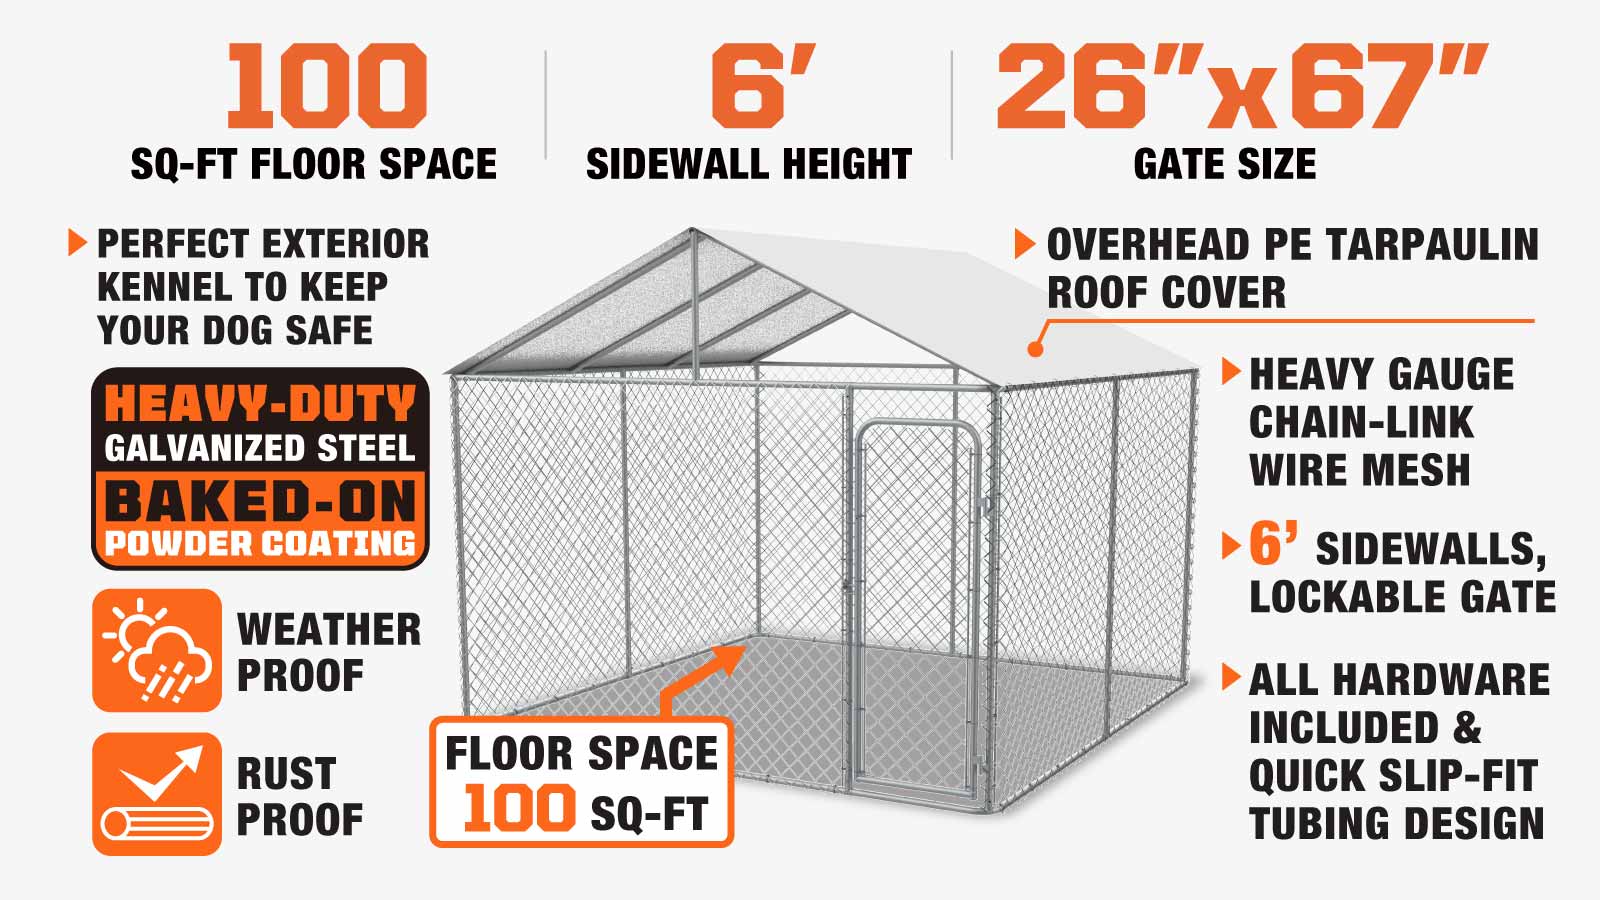 TMG Industrial 10' x 10' Outdoor Dog Kennel Playpen with Cover, Outdoor Dog Runner, Pet Exercise House, Lockable Gate, 6' Chain-Link Fence, TMG-DCP1010-description-image